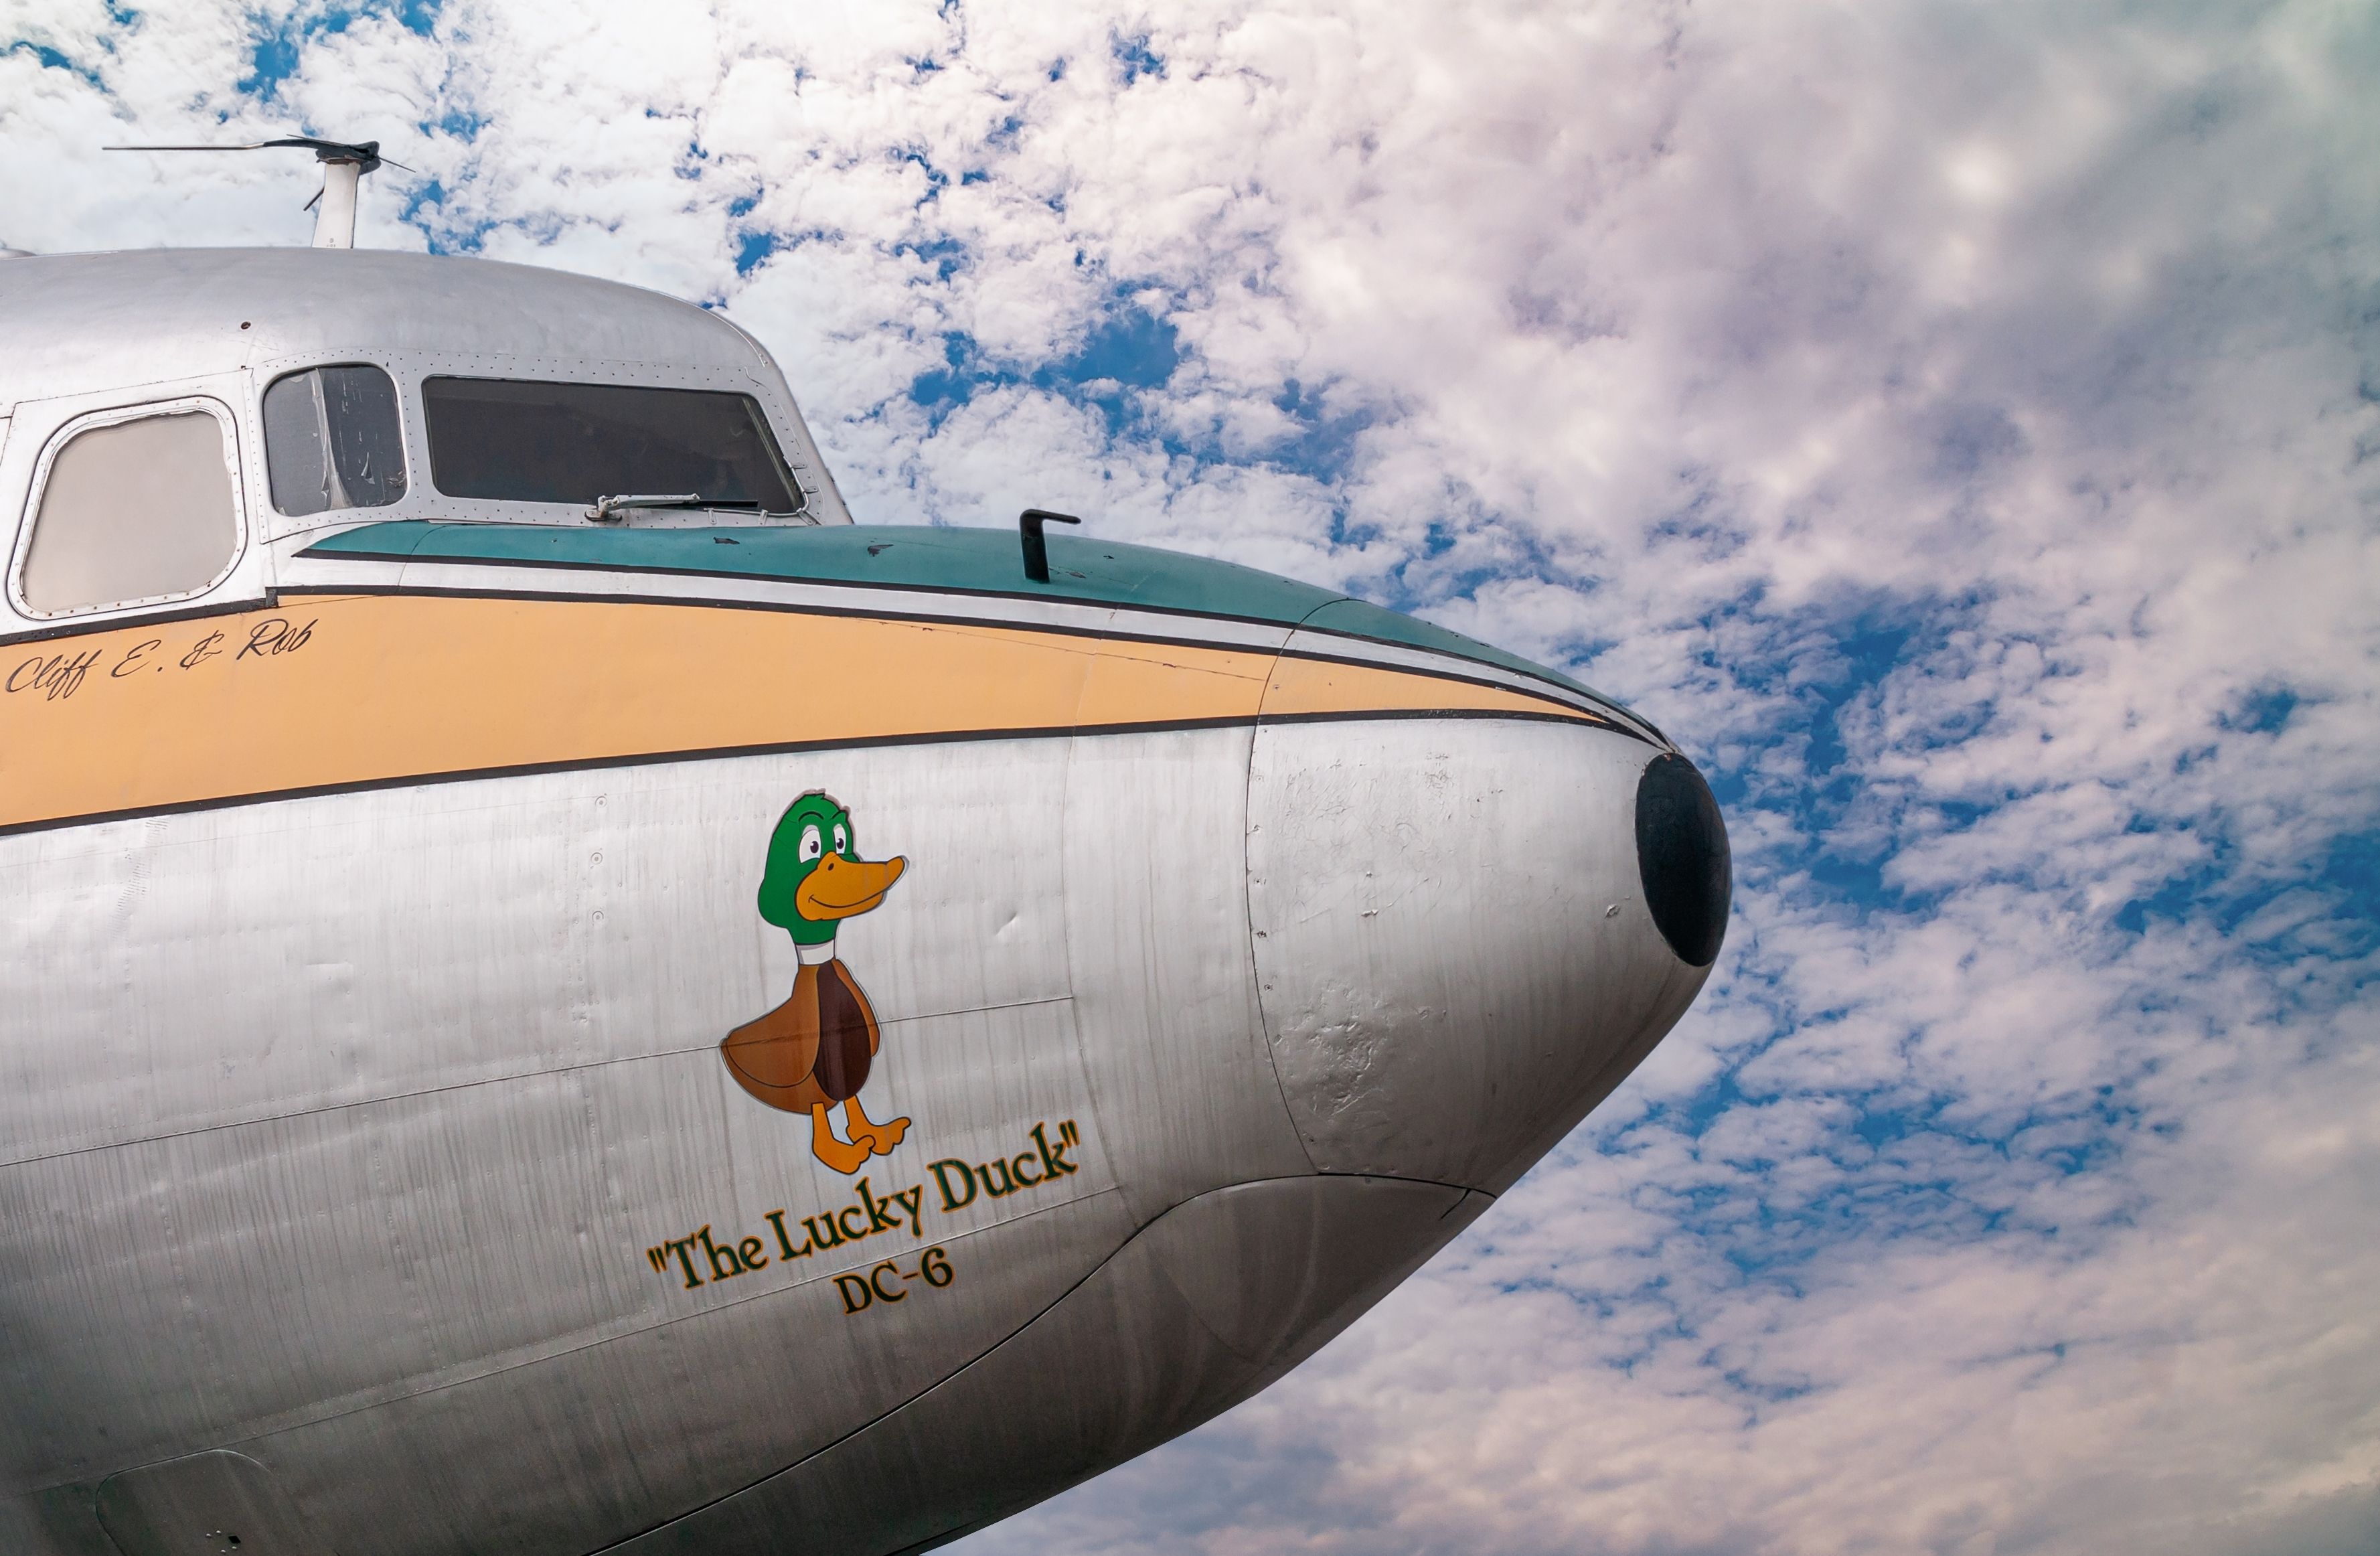 The Lucky Duck DC-6 nose 